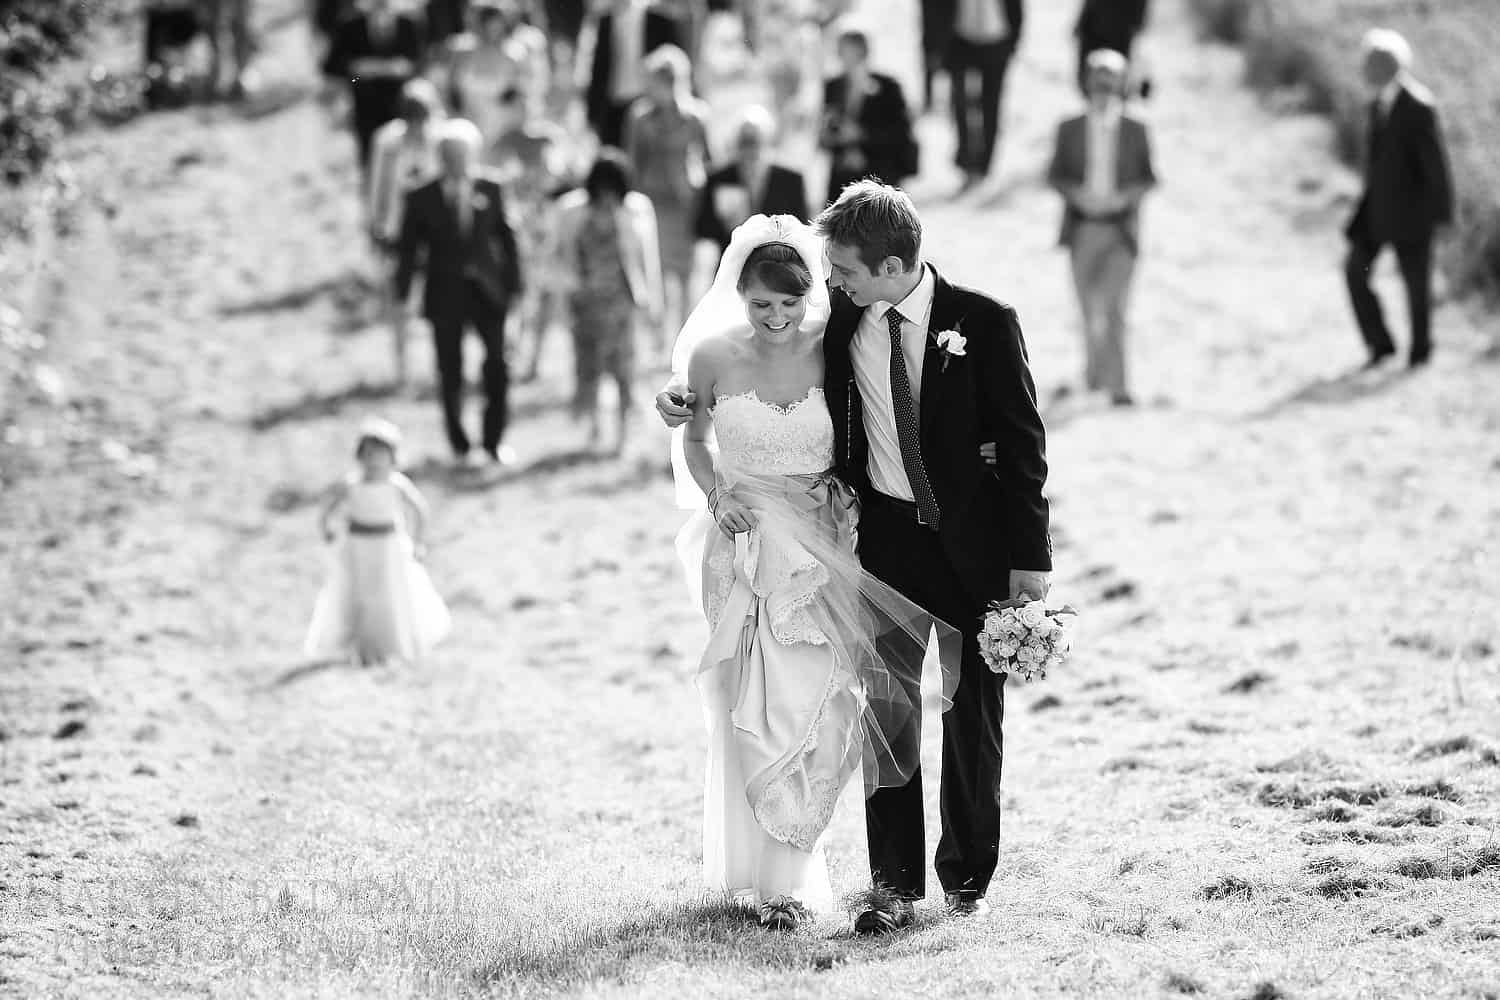 Bride and groom lead the wedding guests across sunny fields to the wedding reception